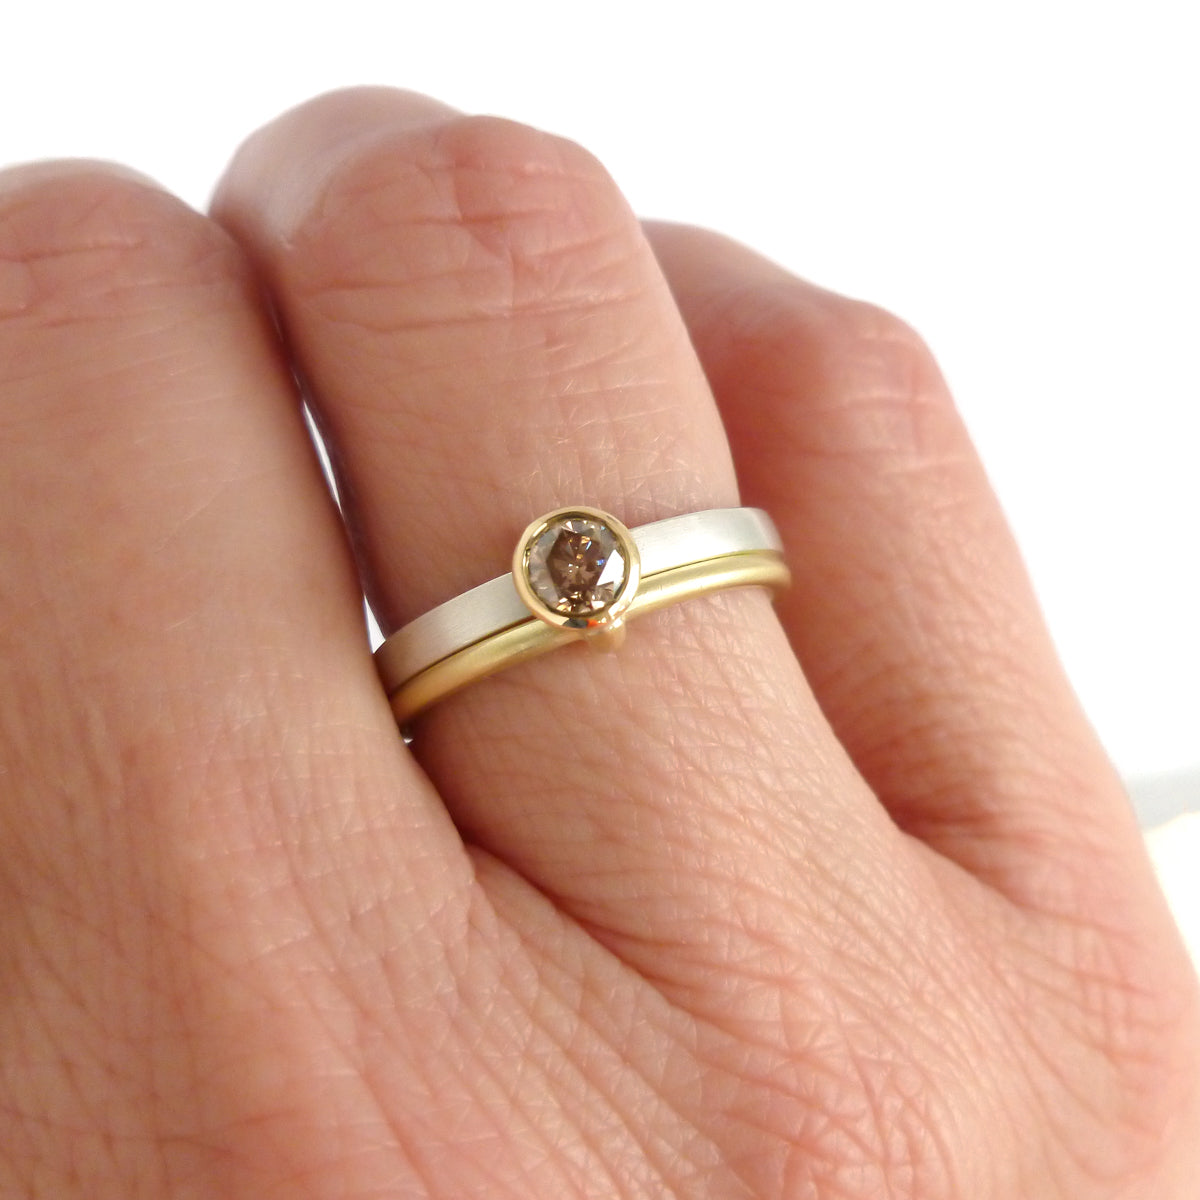 Unusual, unique, bespoke and modern two band silver, gold and brown diamond ring with a brushed finish. Handmade by Sue Lane Contemporary Jewellery, UK